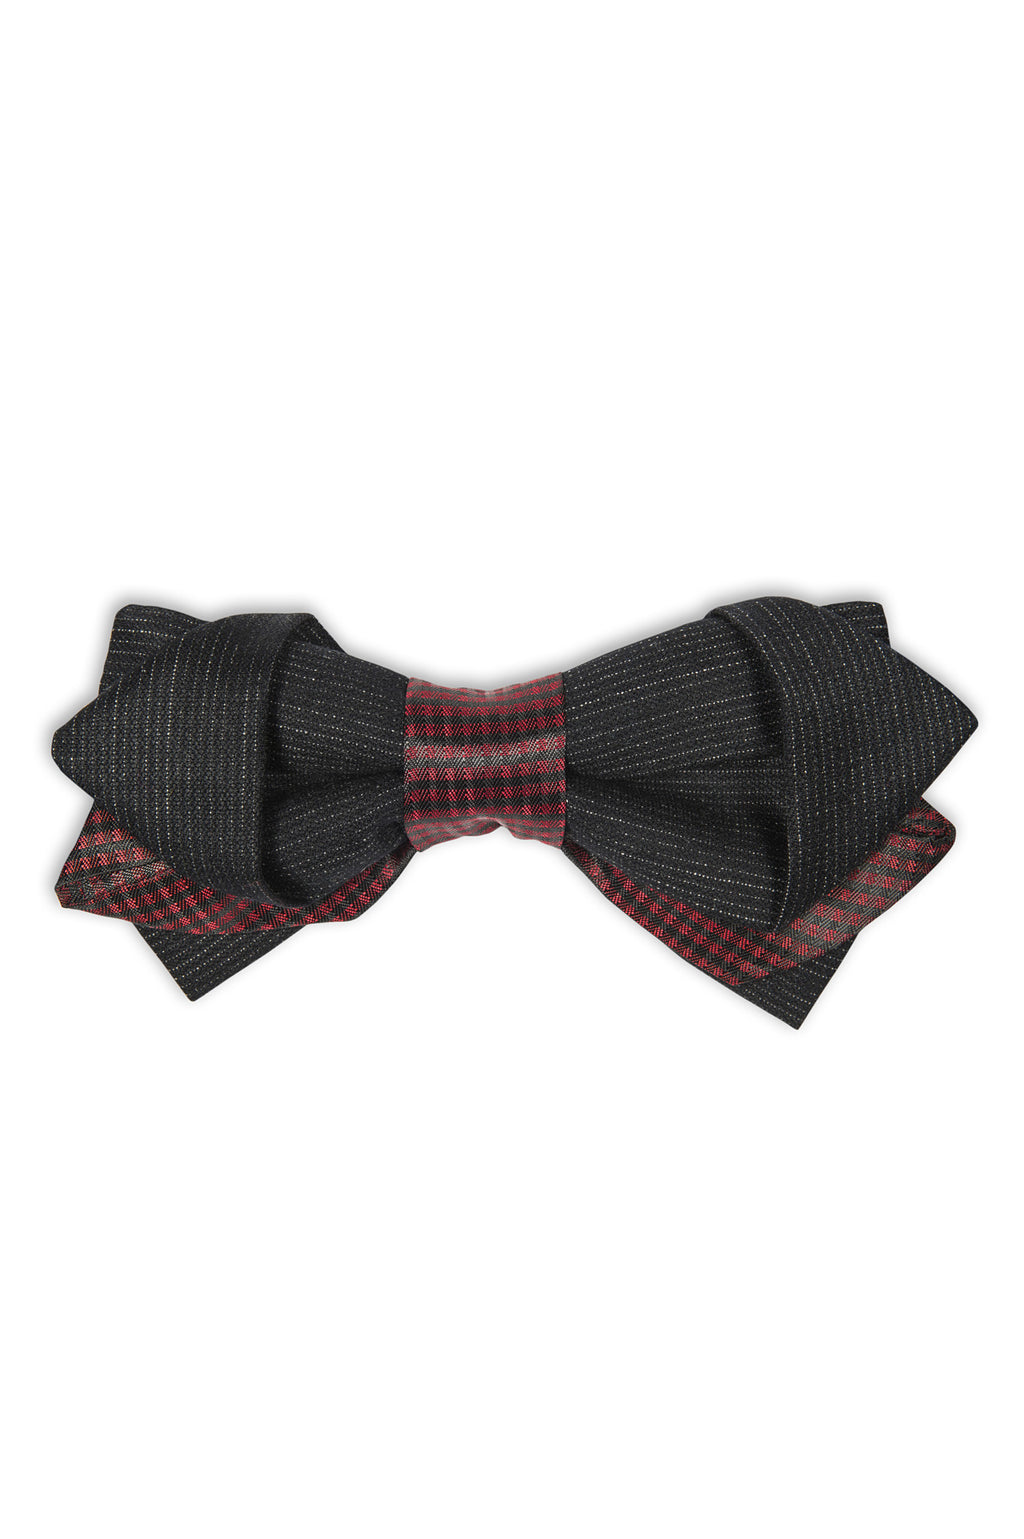 Handmade bow tie in a special cut - Noeud papillon avec coupe originale